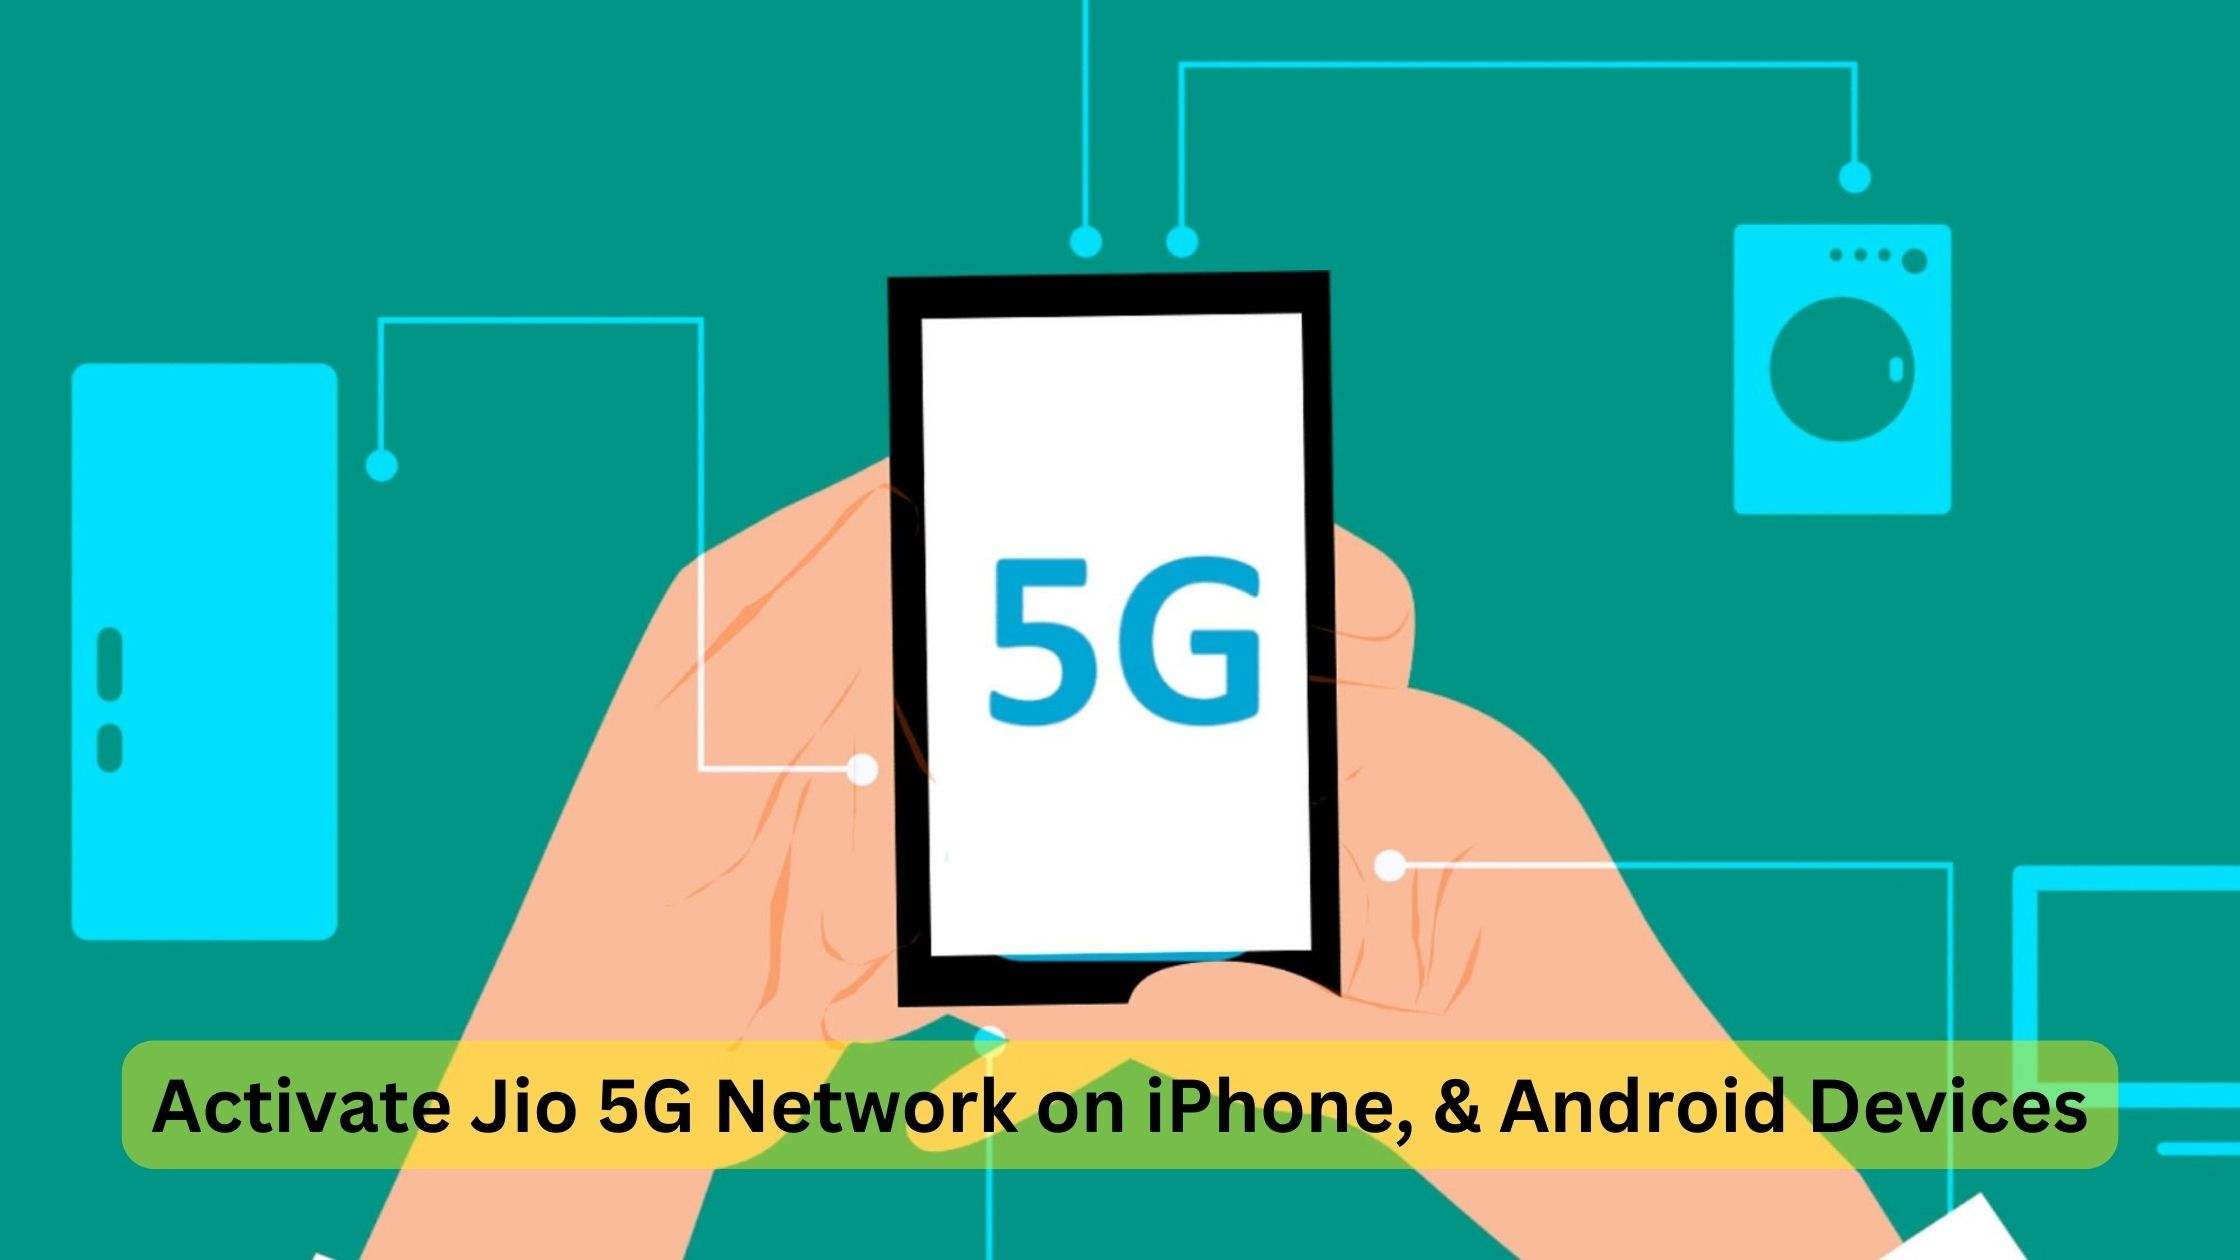 How to activate Jio 5G network